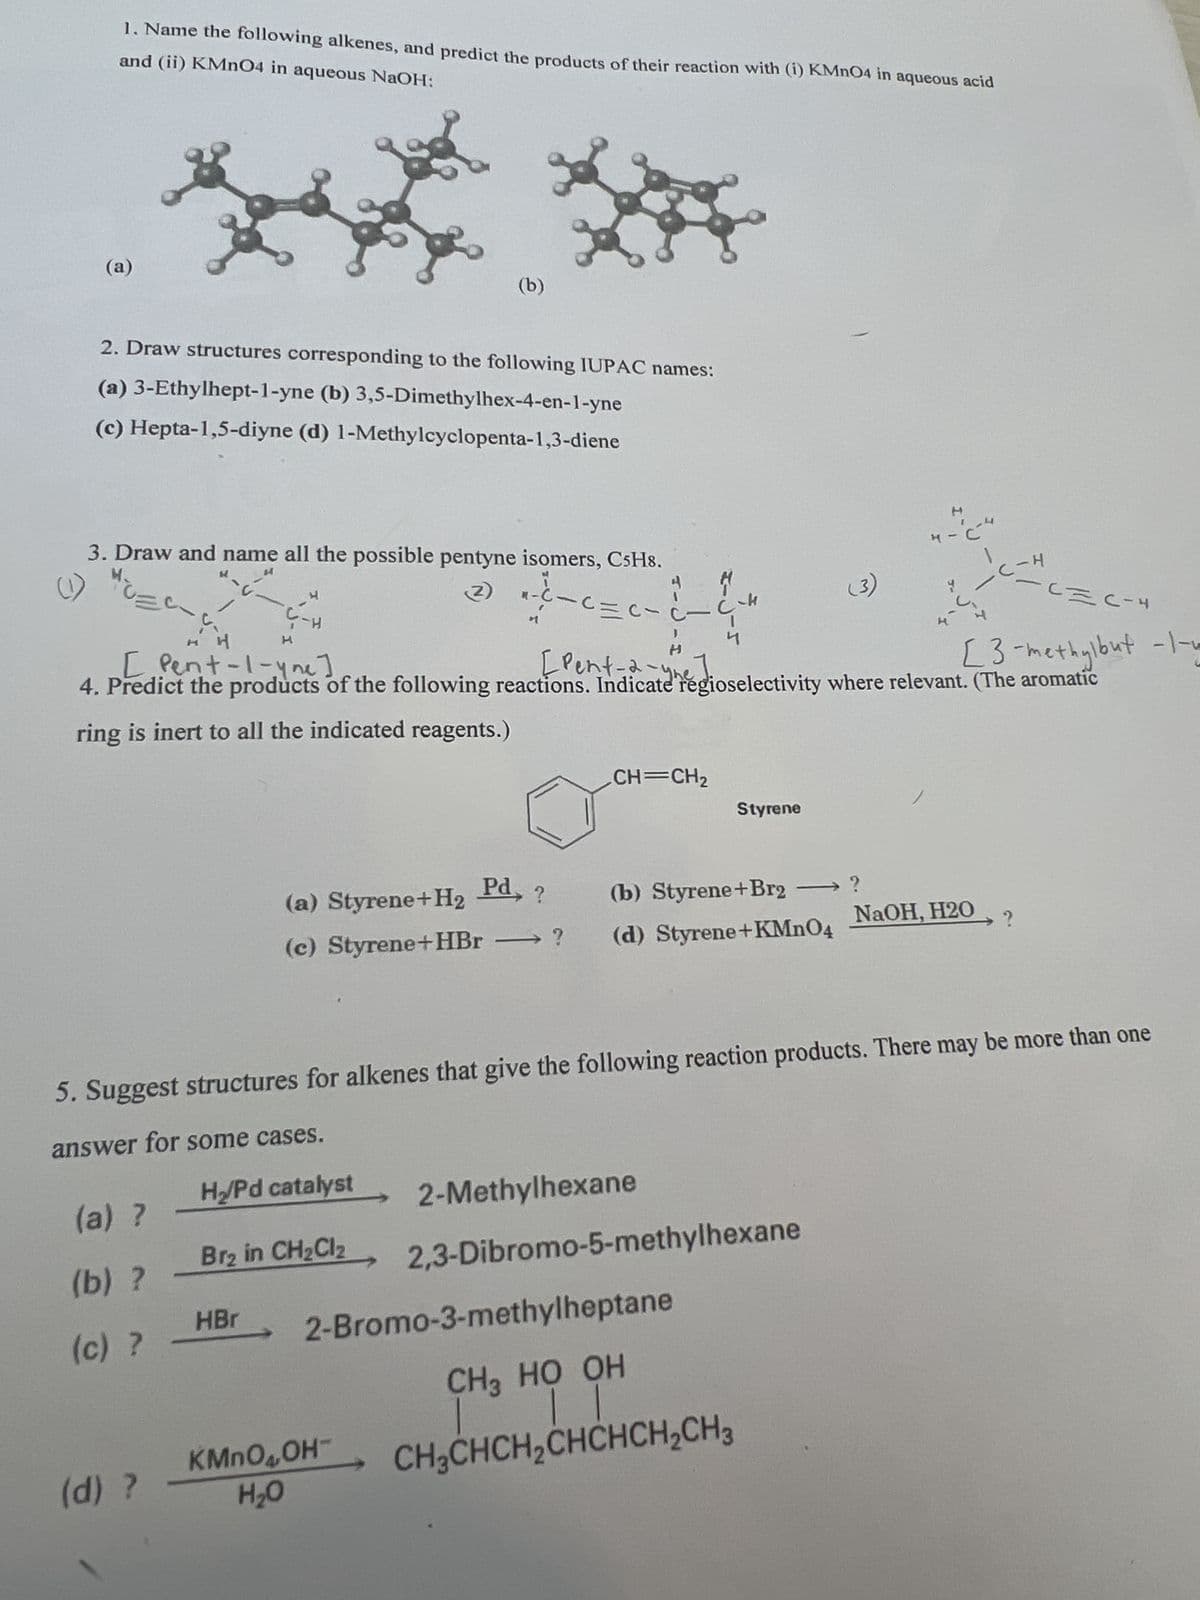 and (ii) KMnO4 in aqueous NaOH:
1. Name the following alkenes, and predict the products of their reaction with (i) KMnO4 in aqueous acid
(a)
(b)
2. Draw structures corresponding to the following IUPAC names:
(a) 3-Ethylhept-1-yne (b) 3,5-Dimethylhex-4-en-1-yne
(c) Hepta-1,5-diyne (d) 1-Methylcyclopenta-1,3-diene
(1)
3. Draw and name all the possible pentyne isomers, C5H8.
H
H
Ç-H
[ Pent-1-yne]
(2)
4. Predict the products of the following
ring is inert to all the indicated reagents.)
4
H
4-
(3)
4-C
C = C-4
[3-methylbut -1-4
[Pent-2-yhdioselectivity where relevant. (The aromatic
CH=CH2
Styrene
(a) Styrene+H2
Pd, ?
(c) Styrene+HBr
?
(b) Styrene+Br2 → ?
(d) Styrene+KMnO4
NaOH, H2O
?
5. Suggest structures for alkenes that give the following reaction products. There may be more than one
answer for some cases.
HyPd catalyst
(a) ?
Br₂ in CH2Cl2
(b) ?
HBr
(c) ?
2-Methylhexane
2,3-Dibromo-5-methylhexane
2-Bromo-3-methylheptane
CH3 HO OH
CH3CHCH2CHCHCH2CH3
KMnO4OH
(d) ?
H₂O